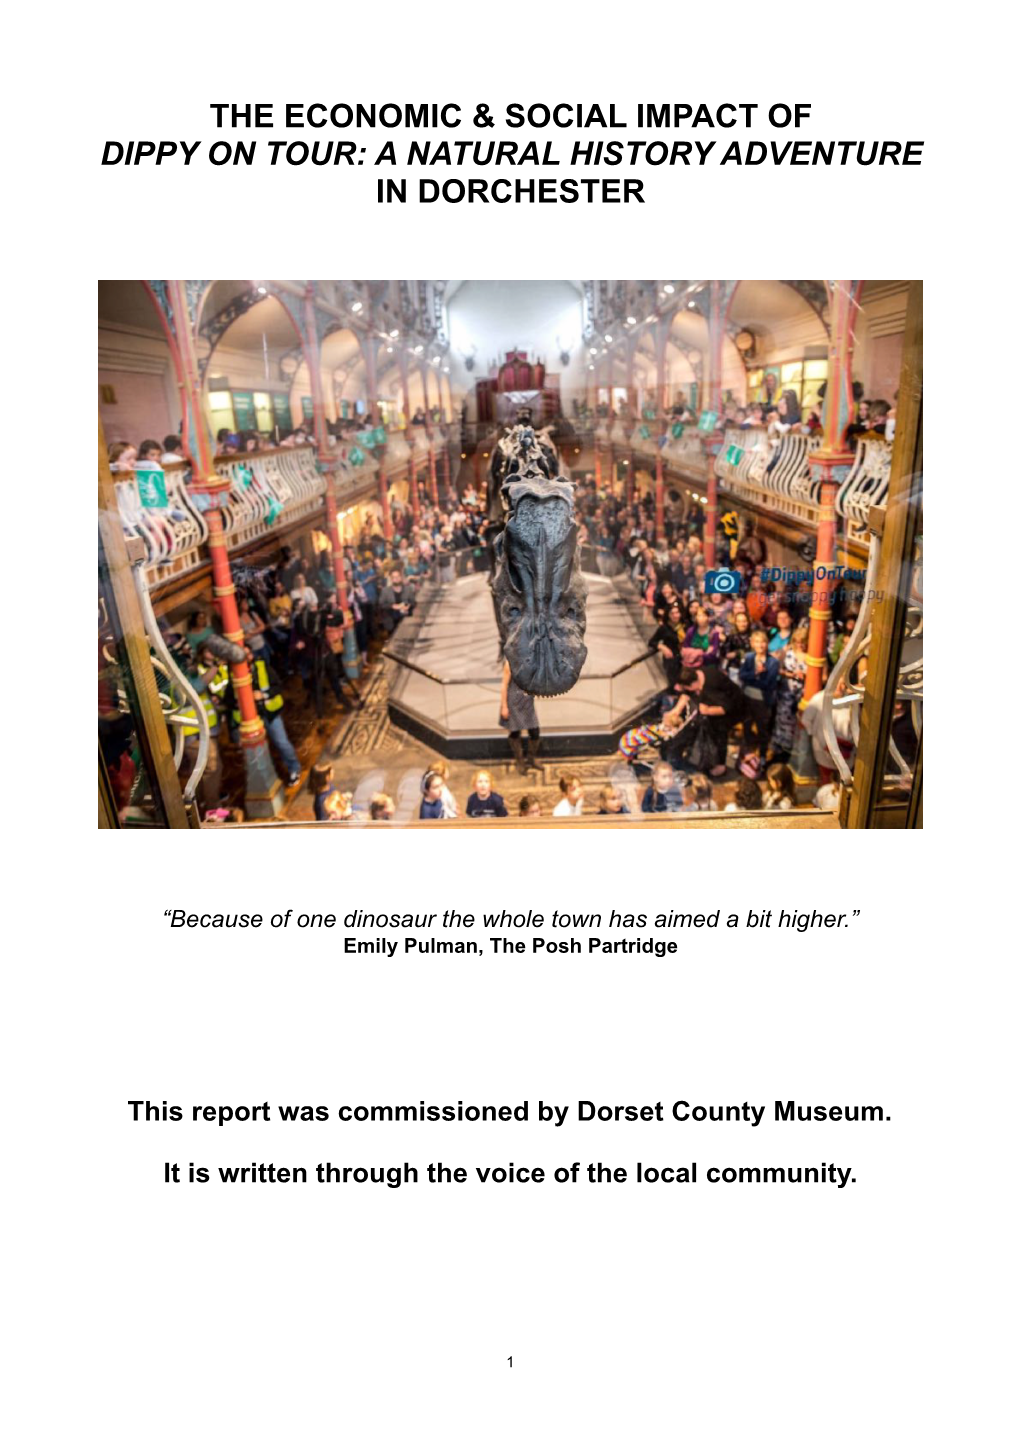 Economic & Social Impact of Dippy on Tour in Dorchester. 26.06.18